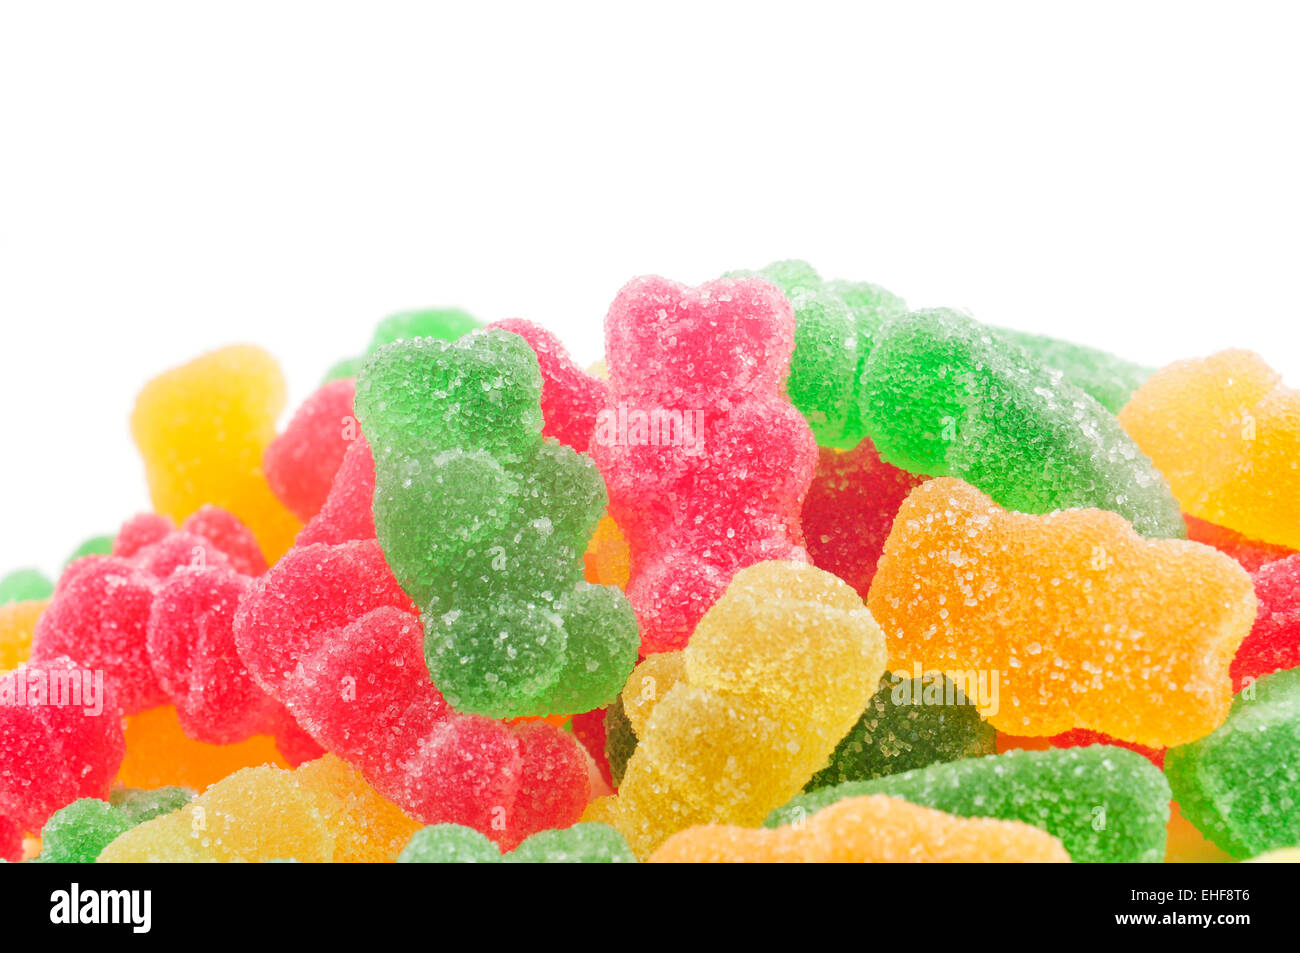 gummy bears of different colors on a white background Stock Photo